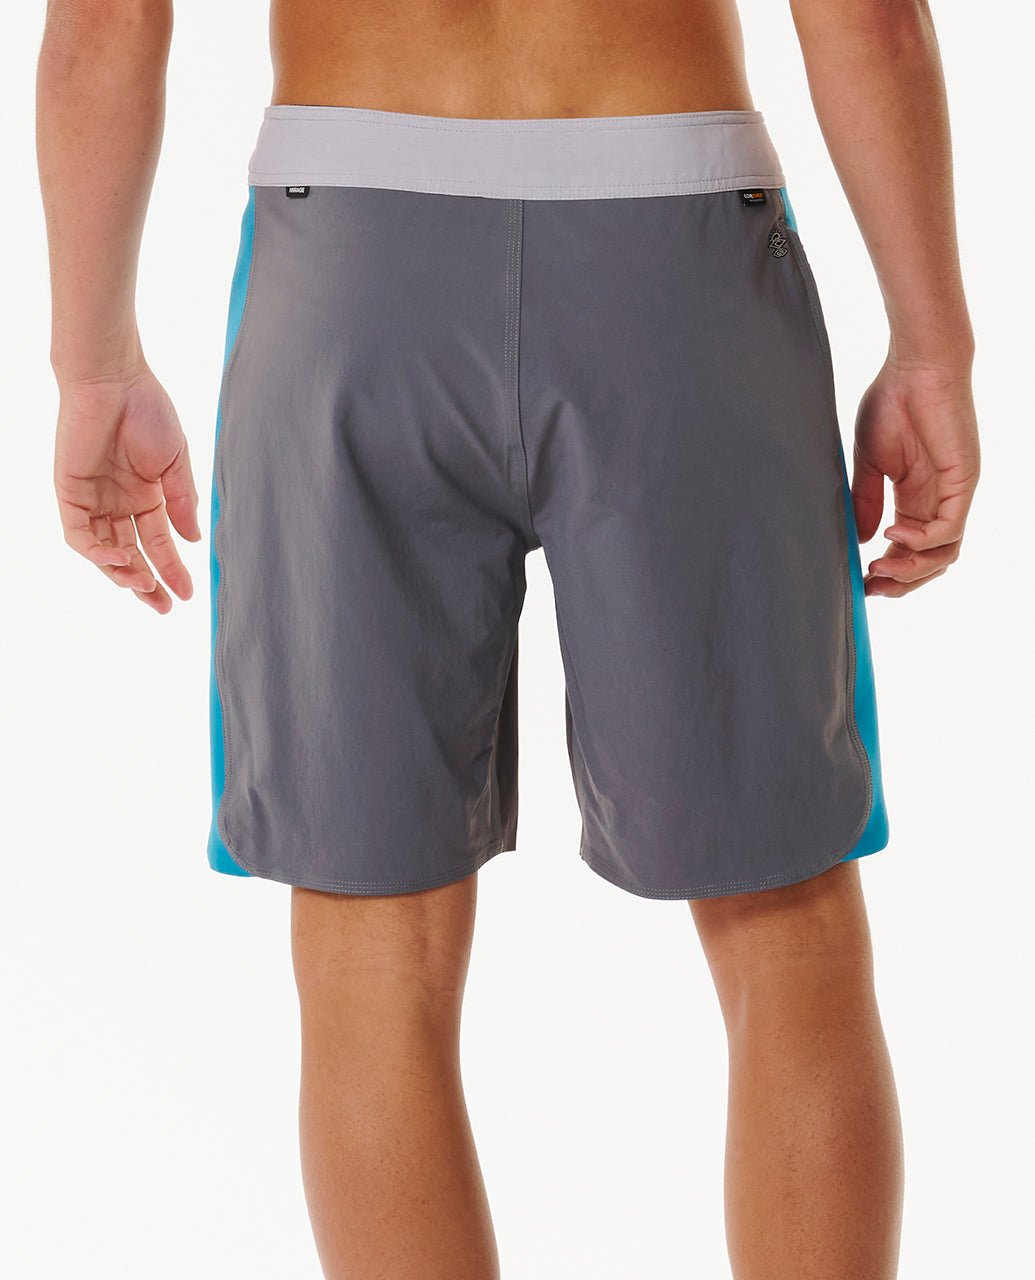 Mirage 3-2-One Ultimate 19" Boardshorts - Light Teal